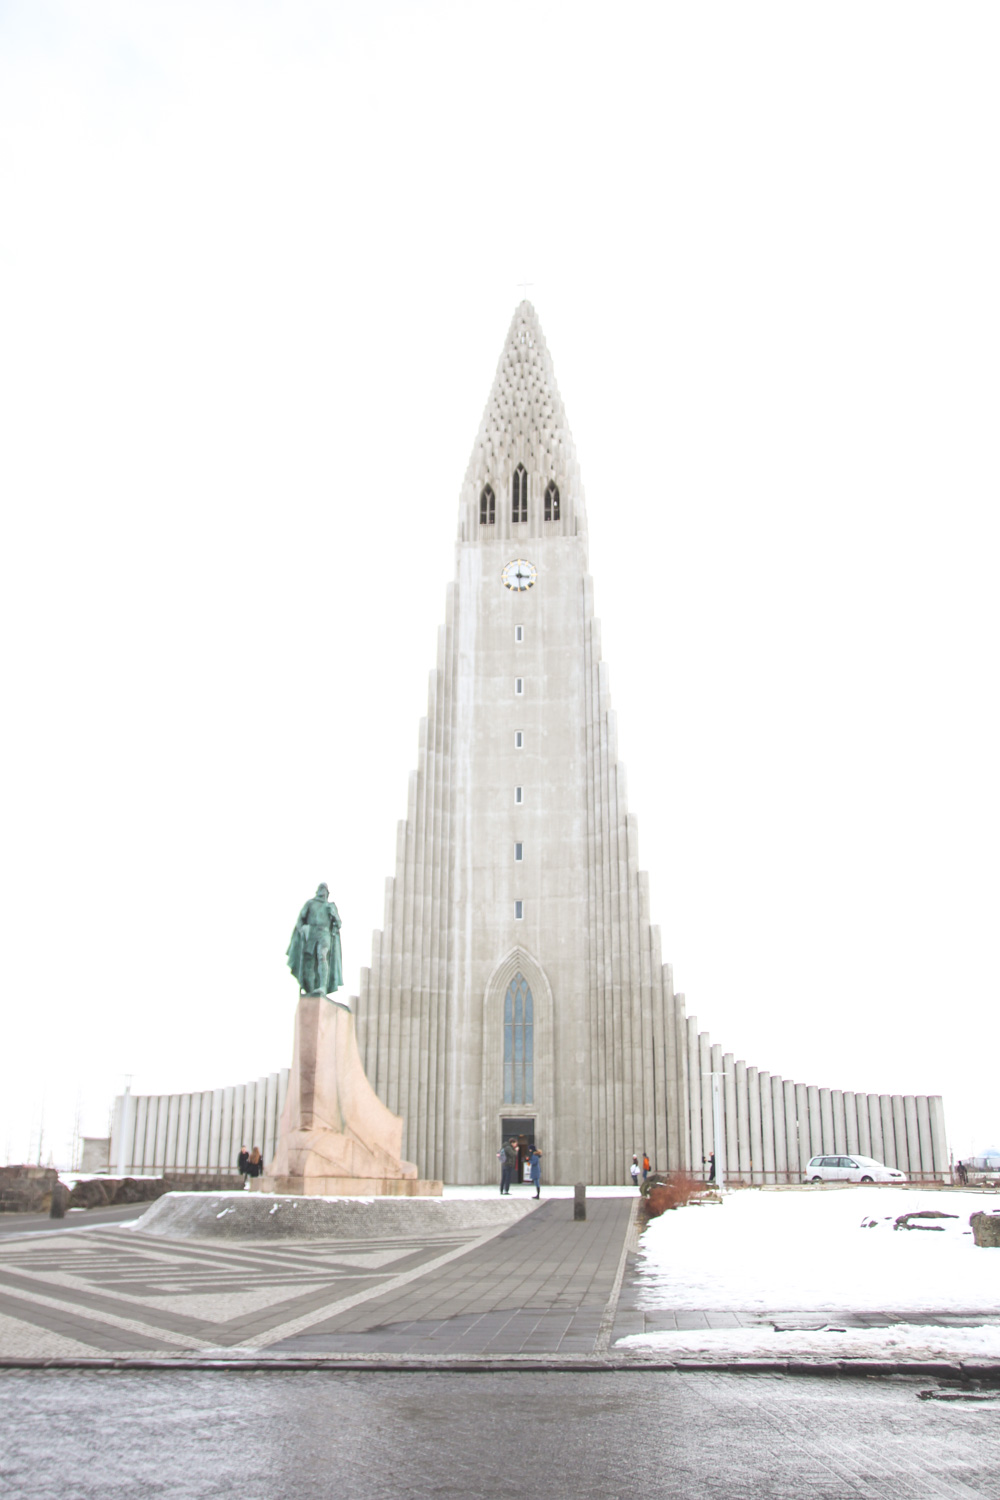 Reykjavik - How to Spend Four Days in Iceland